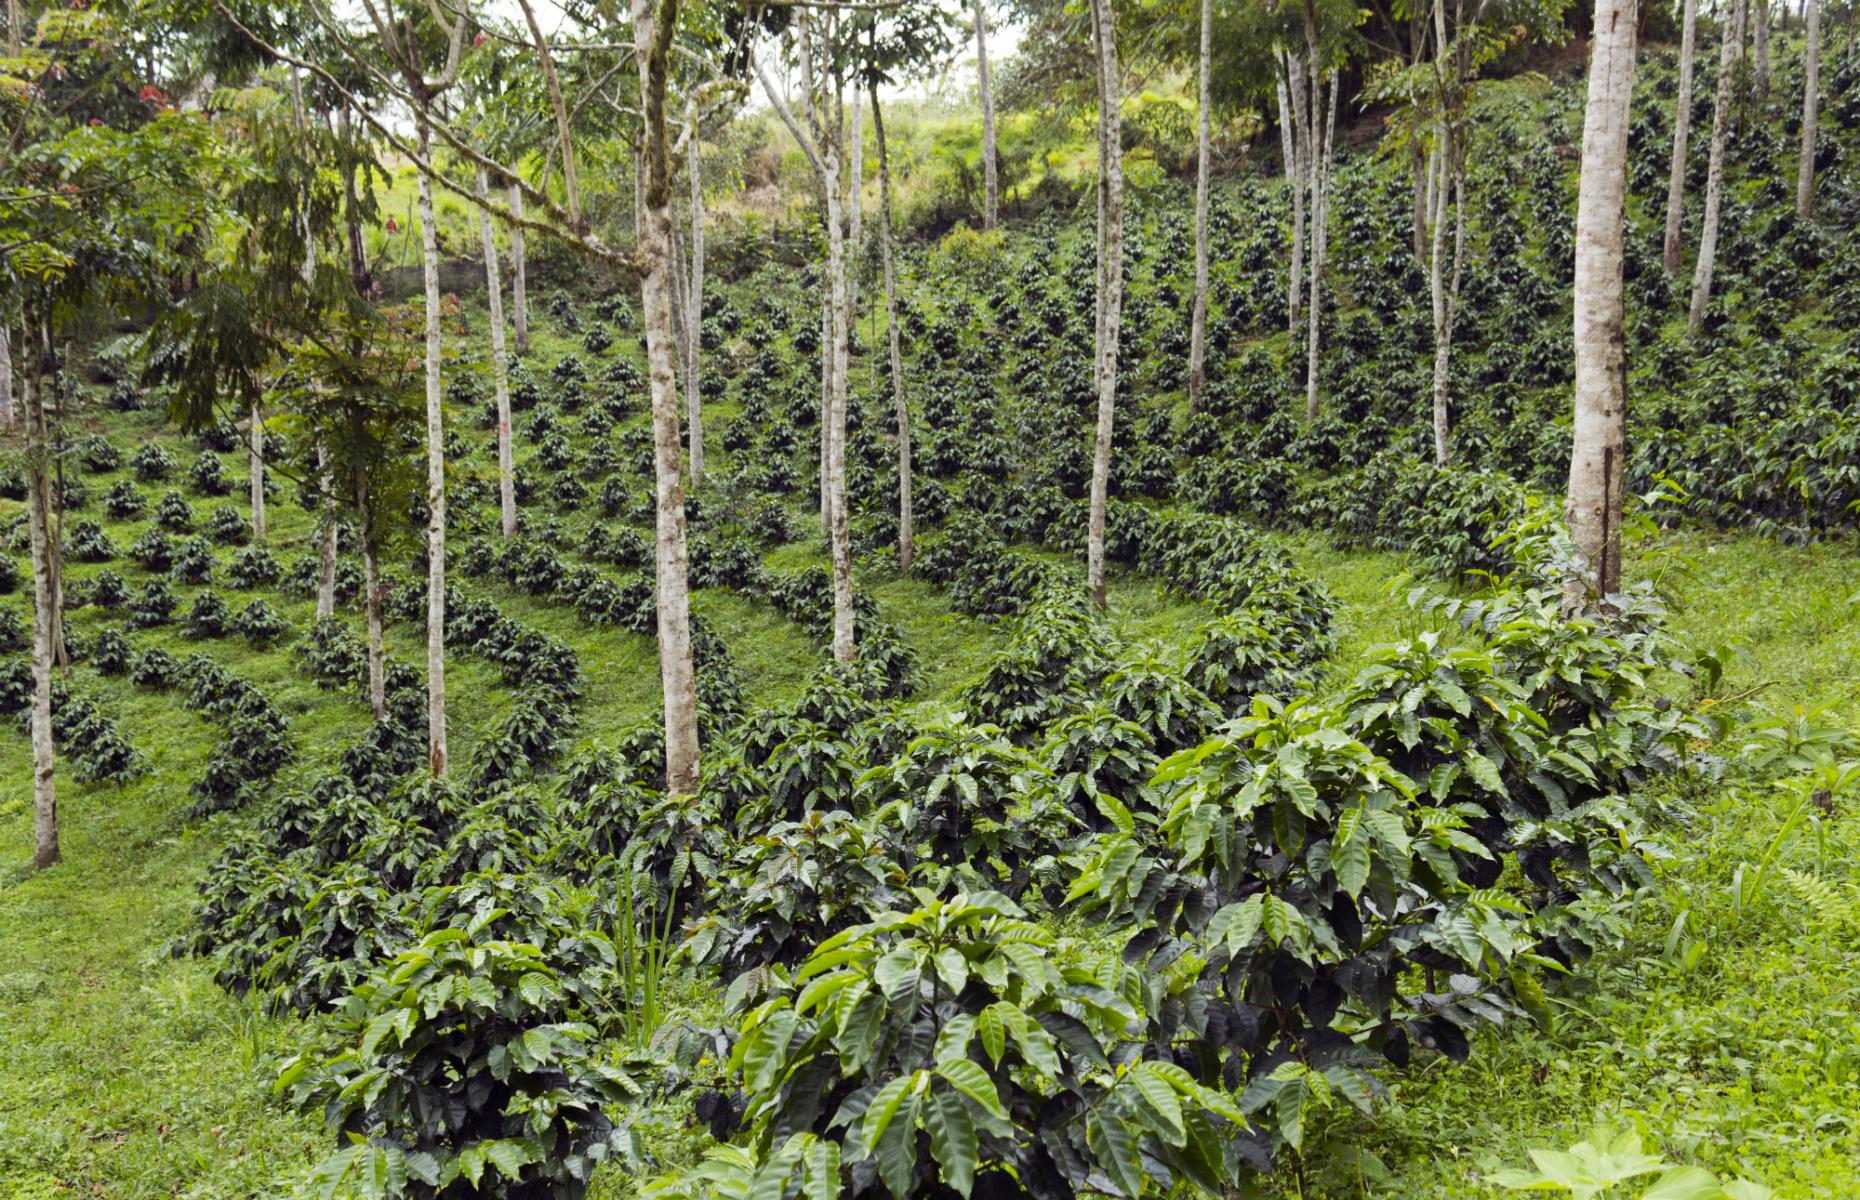 What is the point of shade-grown coffee?